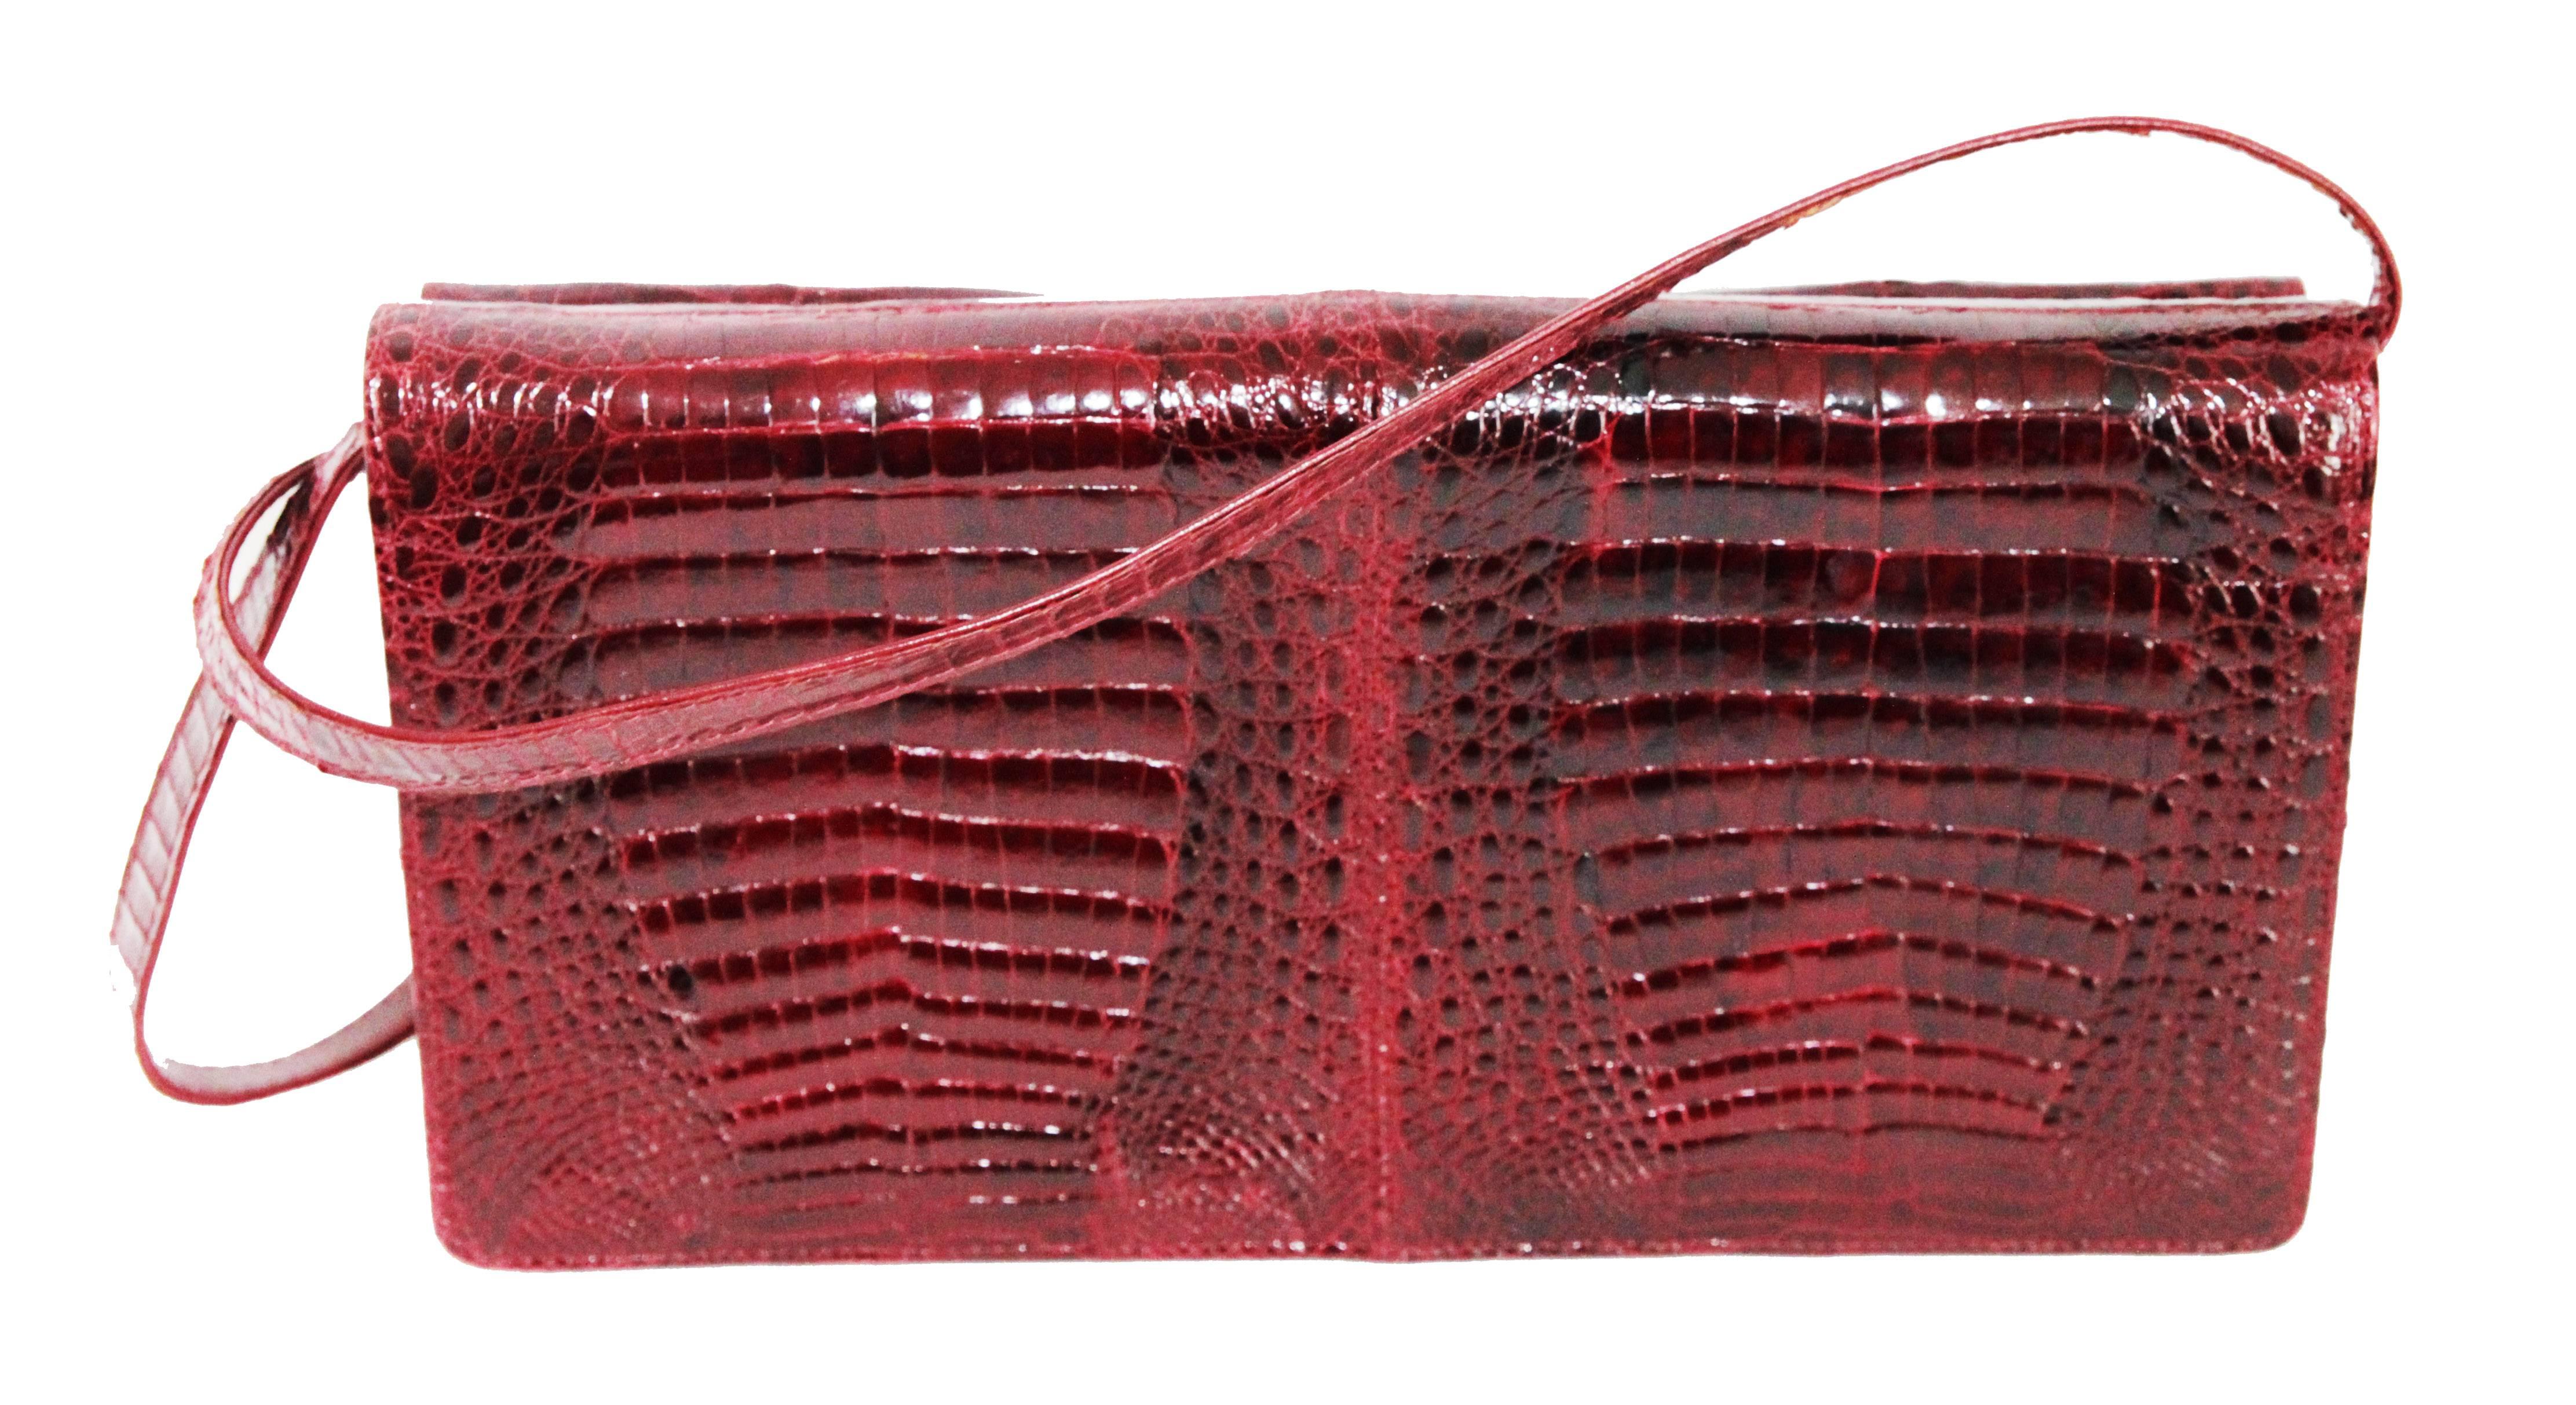 Very stylish Italian baby crocodile leather clutch/handbag. Rare and beautiful quality. c.1970. Gold plated metal finishing. Marked API, Italy. Excellent vintage condition. Size: 29 x 16 x 5 cm. 11.4 x 6.3 x 2 in.
International Shipping - All